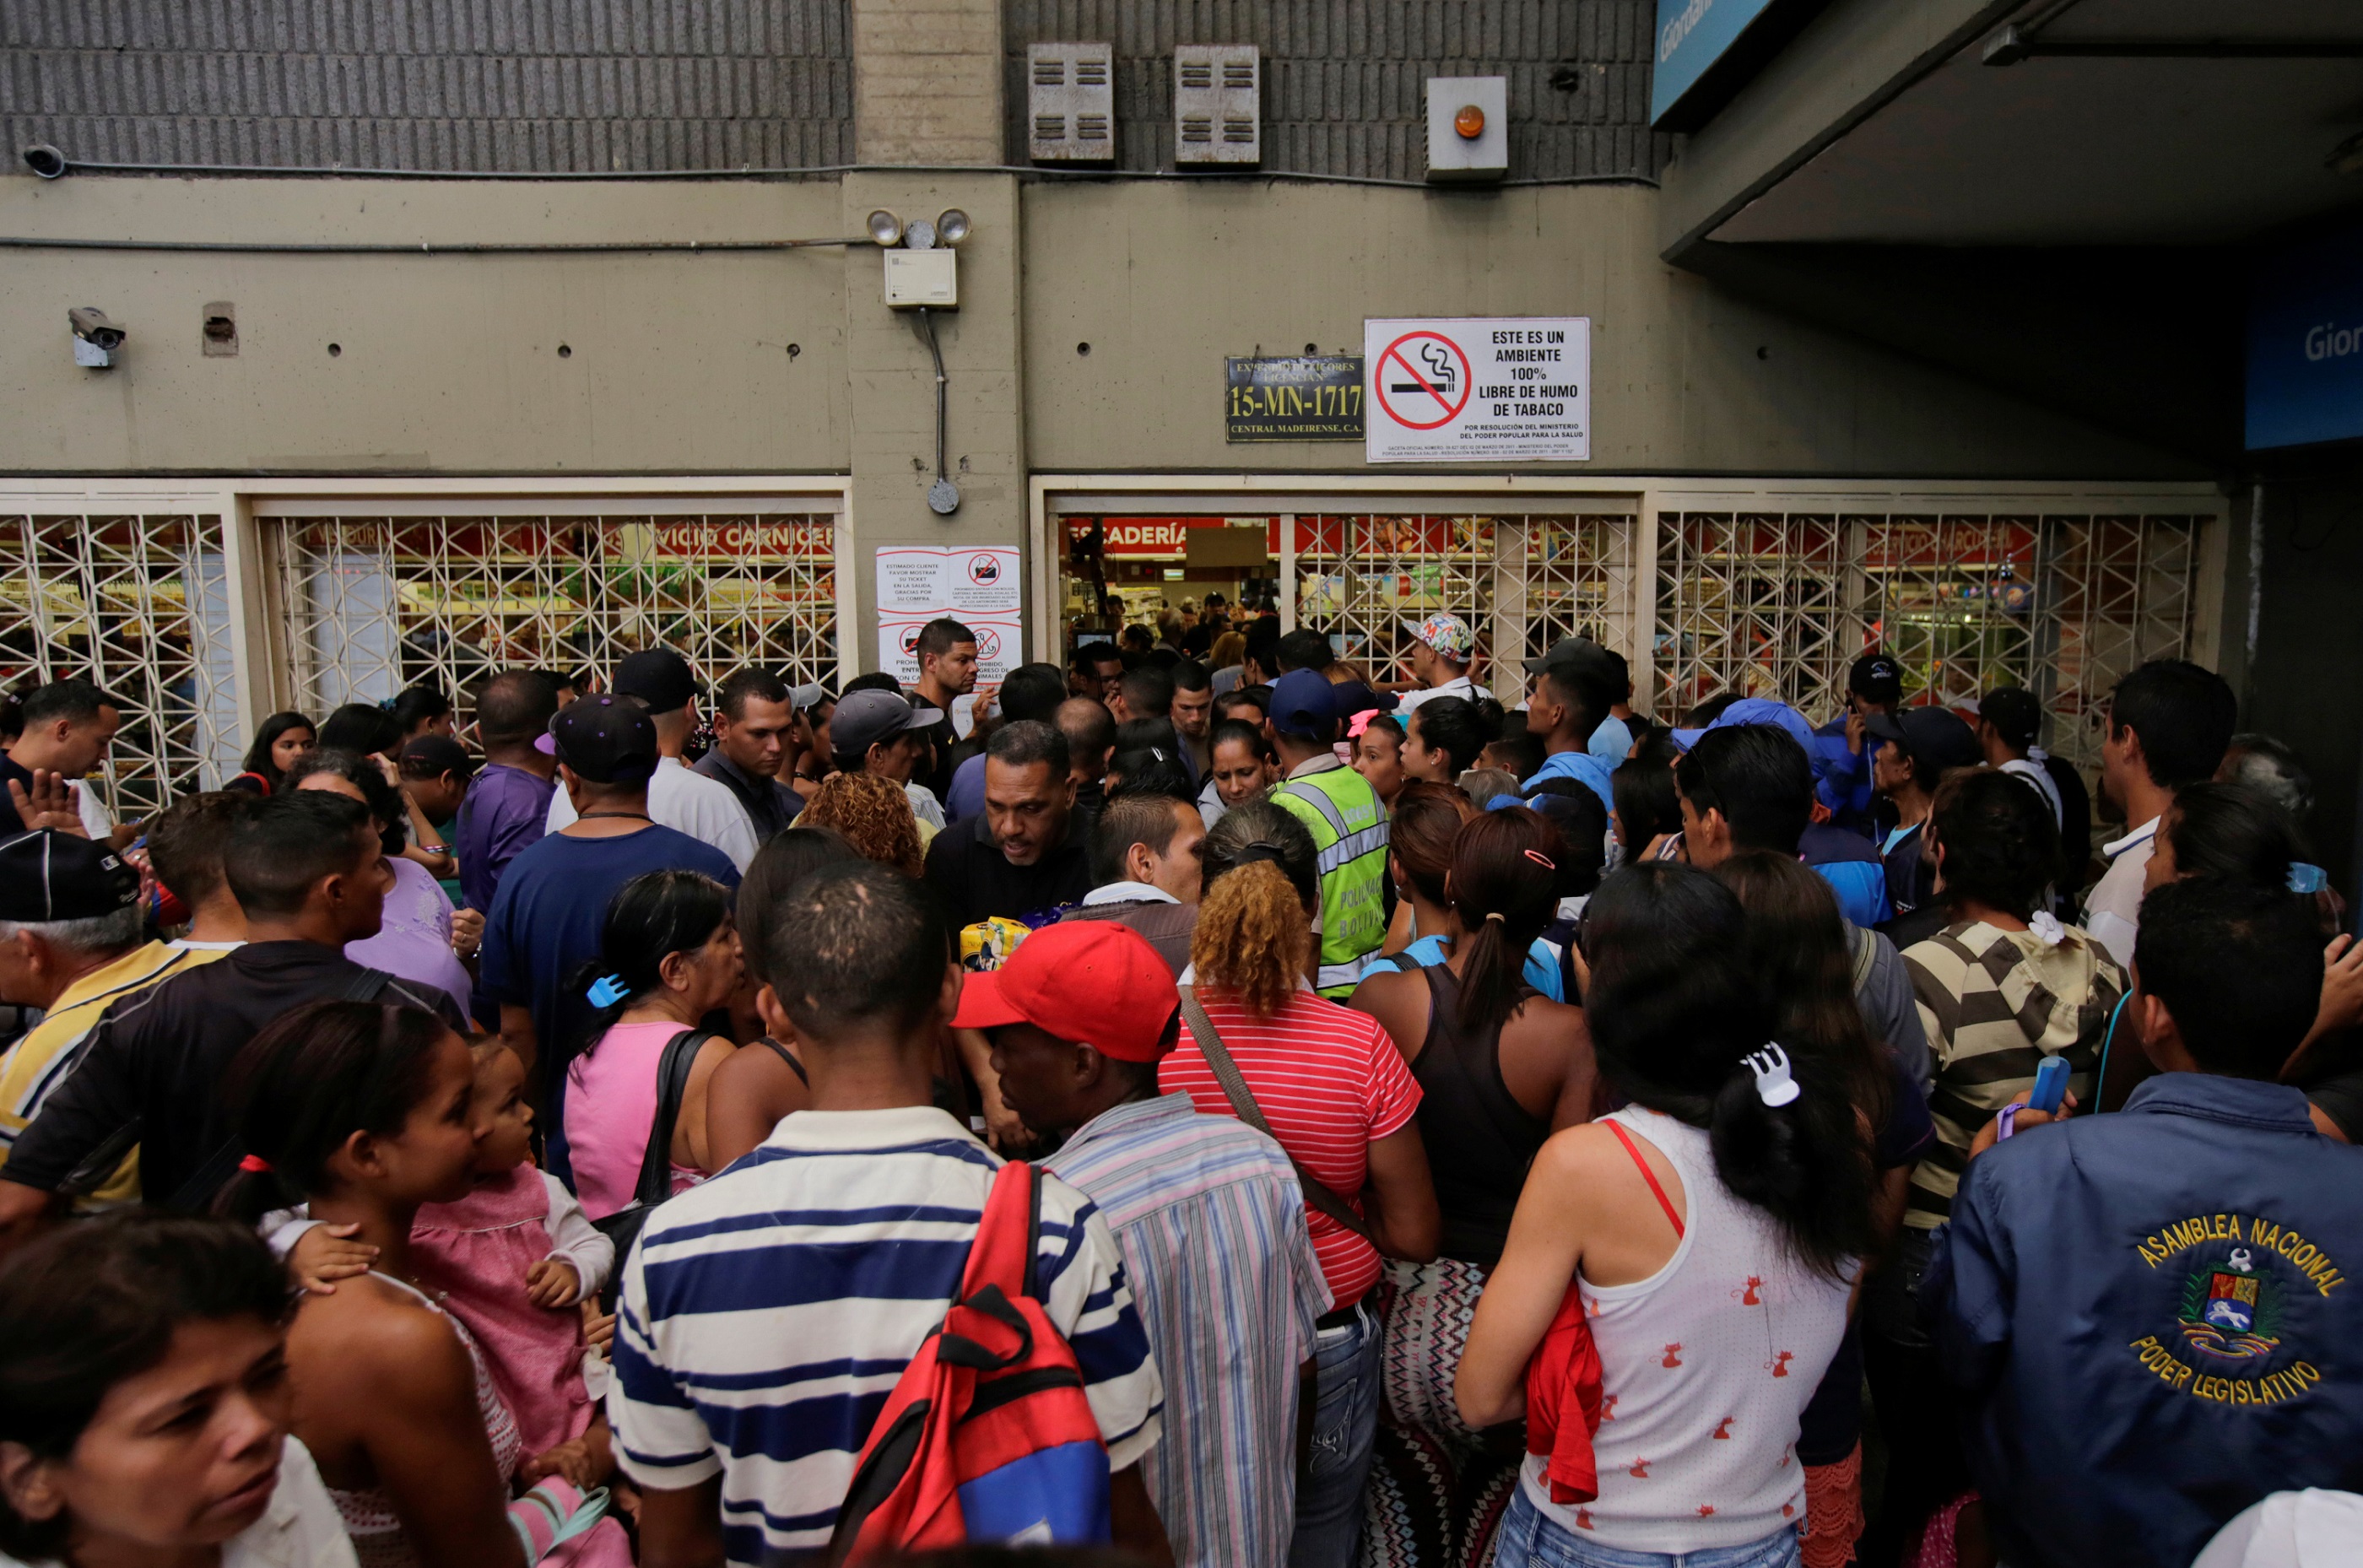 People wait to buy staple items and basic food outside a supermarket in Caracas, Venezuela. Reuters/Henry Romero 